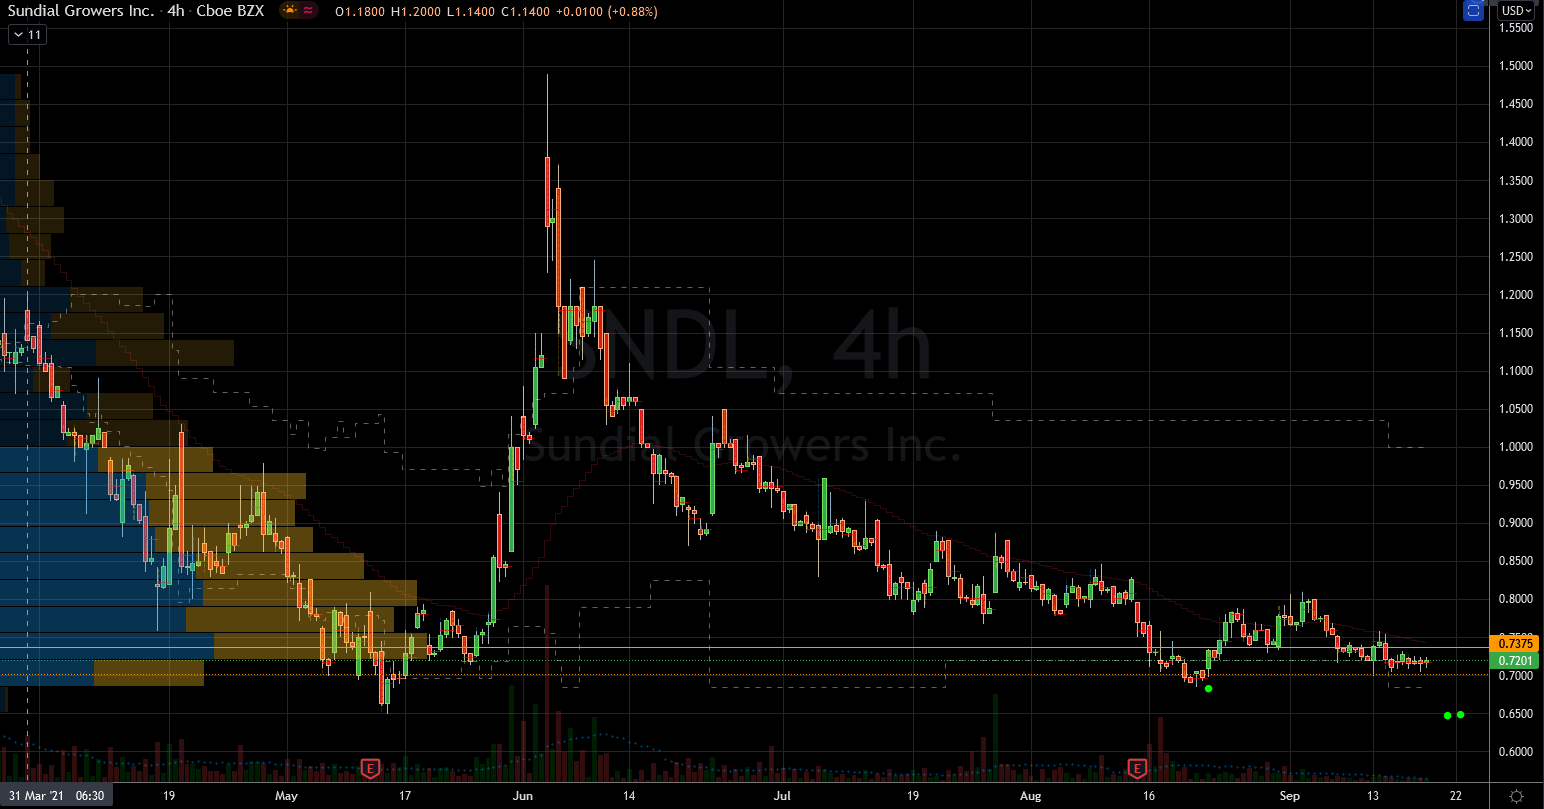 Sundial (SNDL) Stock Chart Showing Short Term Support and Resistance Lines